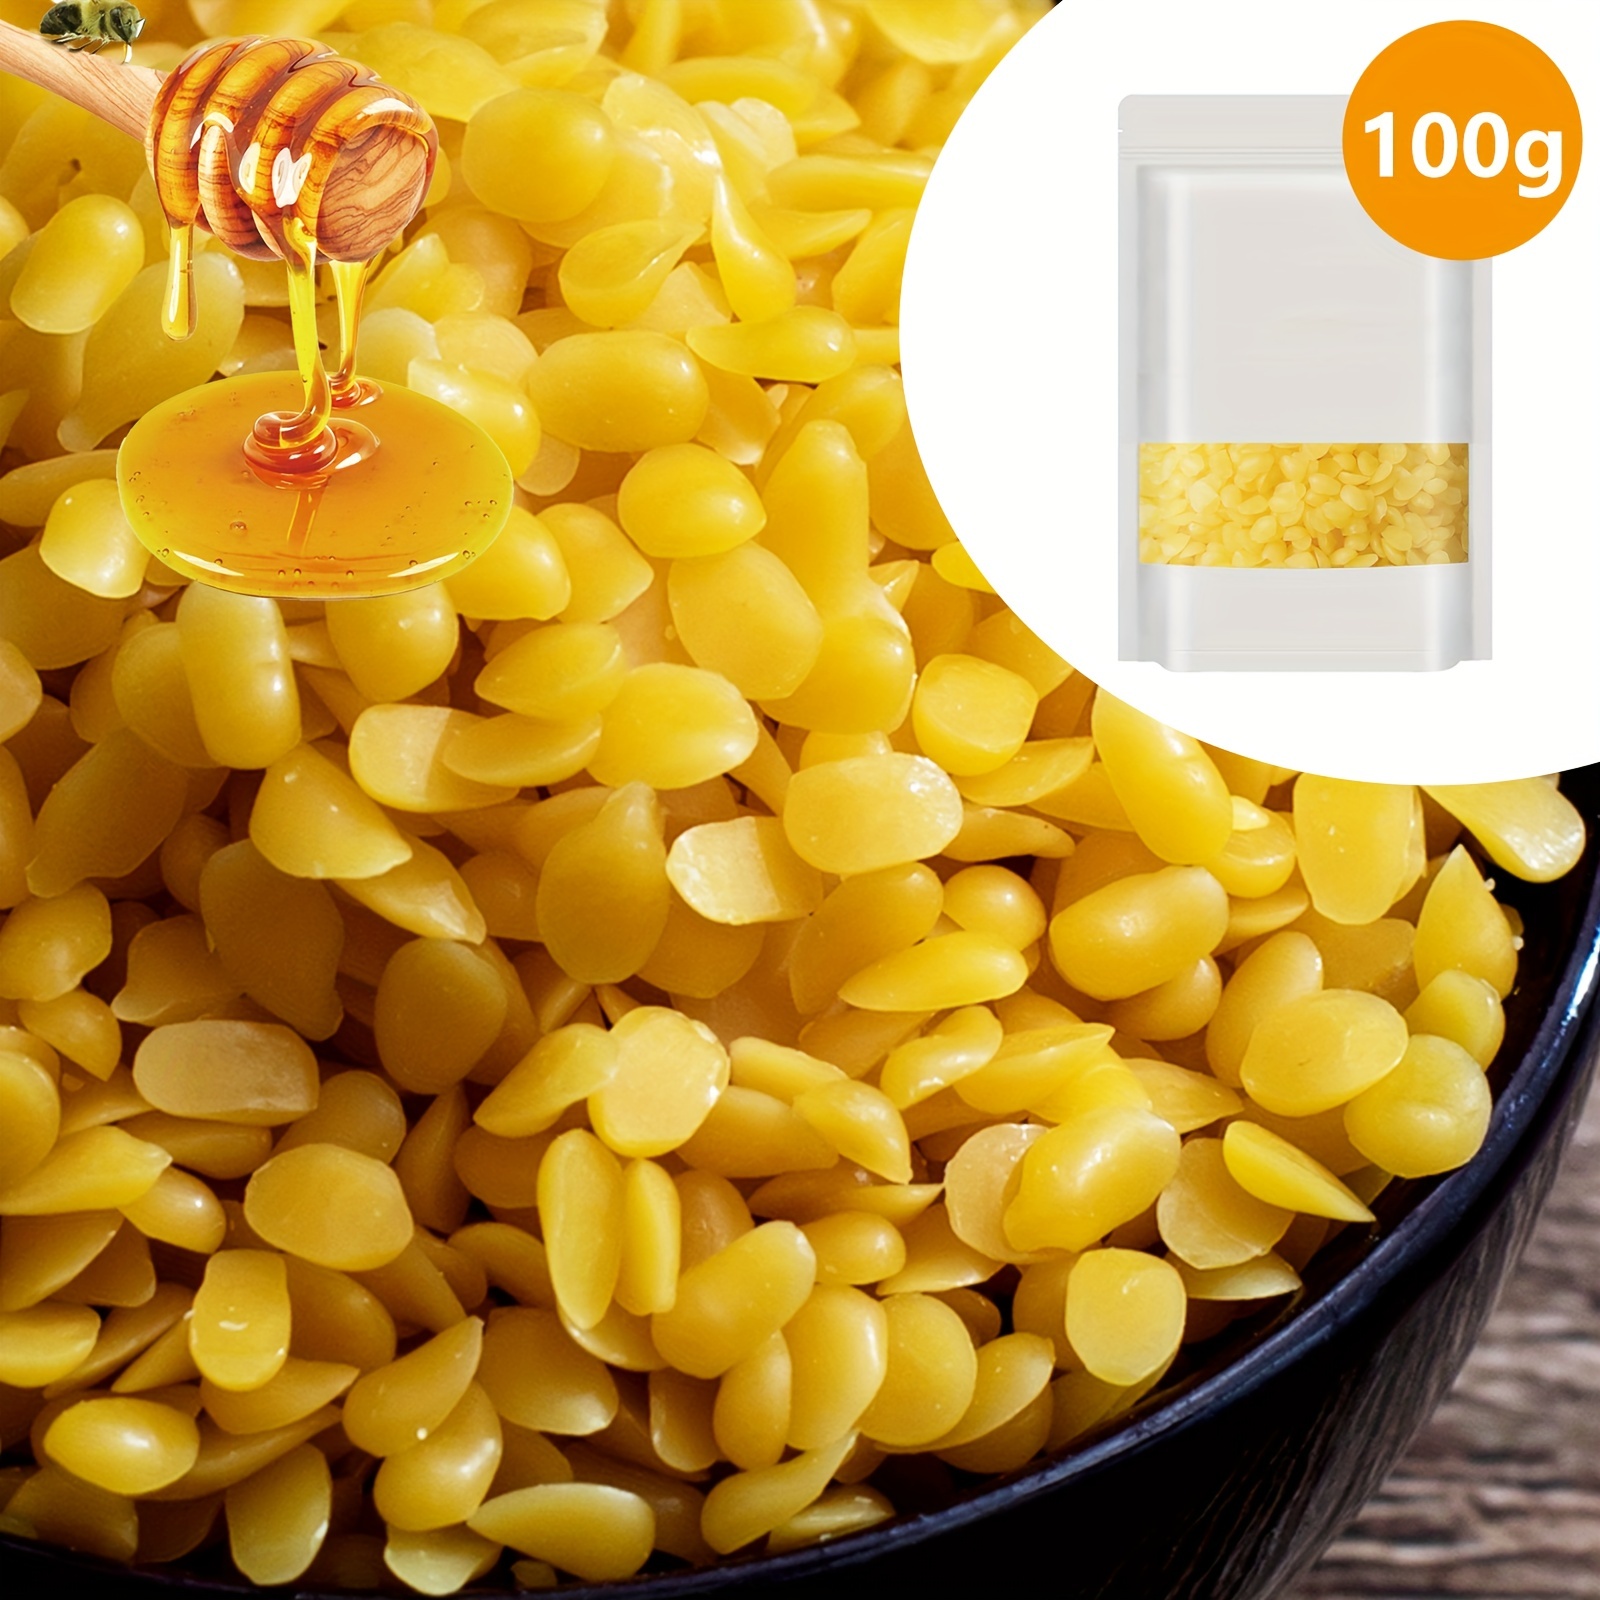 Yellow Beeswax Pellets - Perfect For Diy Candles, Skin Care, Hair